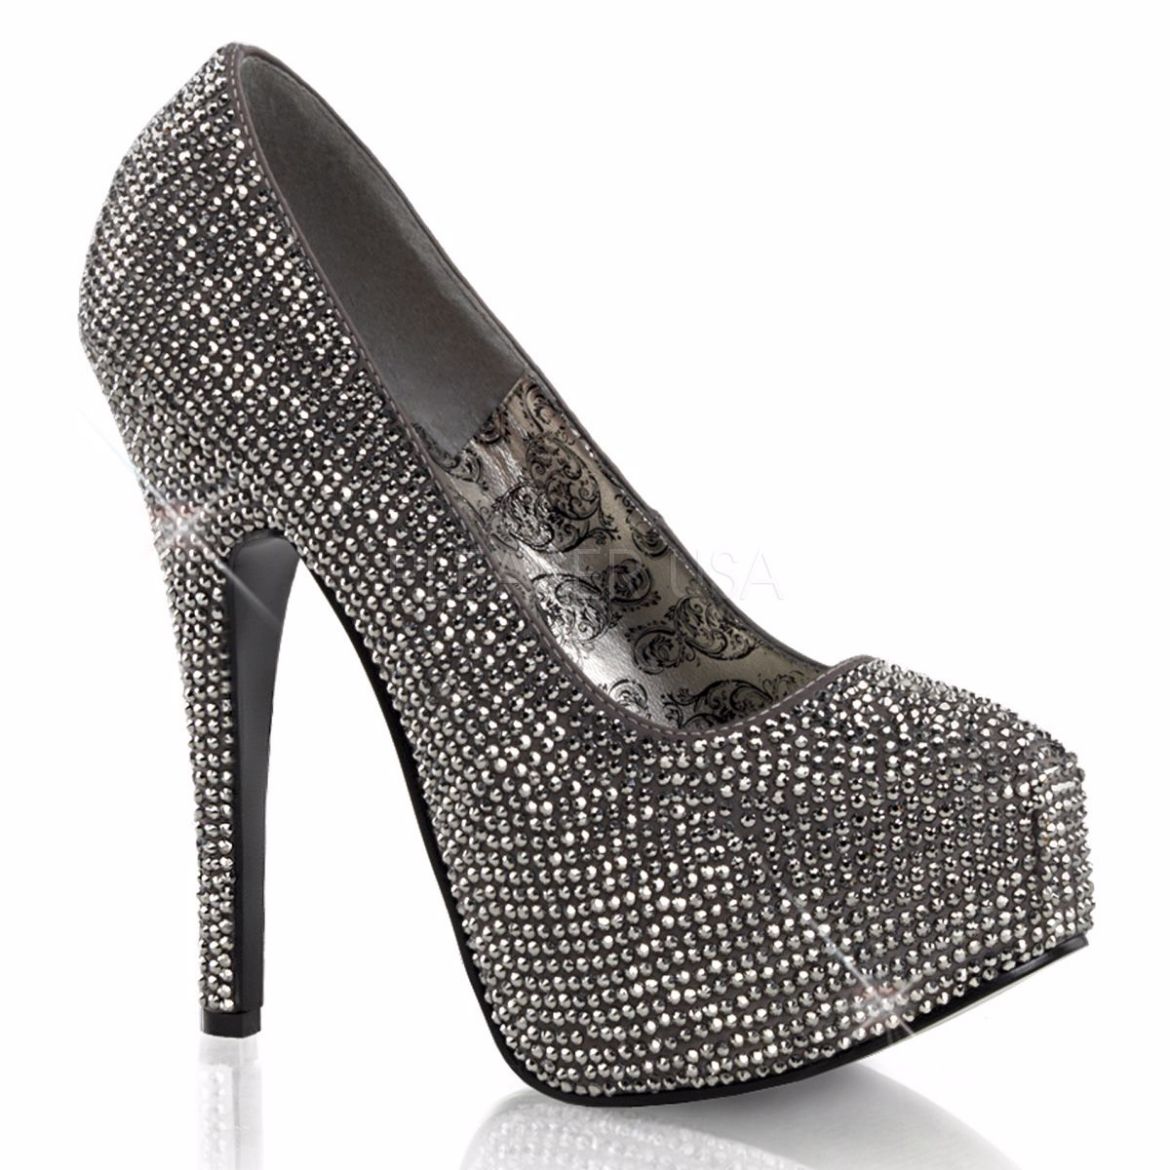 Product image of Fabulicious Teeze-06R Gray Satin-Pewter Rhinestone, 5 3/4 inch (14.6 cm) Heel, 1 3/4 inch (4.4 cm) Hidden Platform Court Pump Shoes